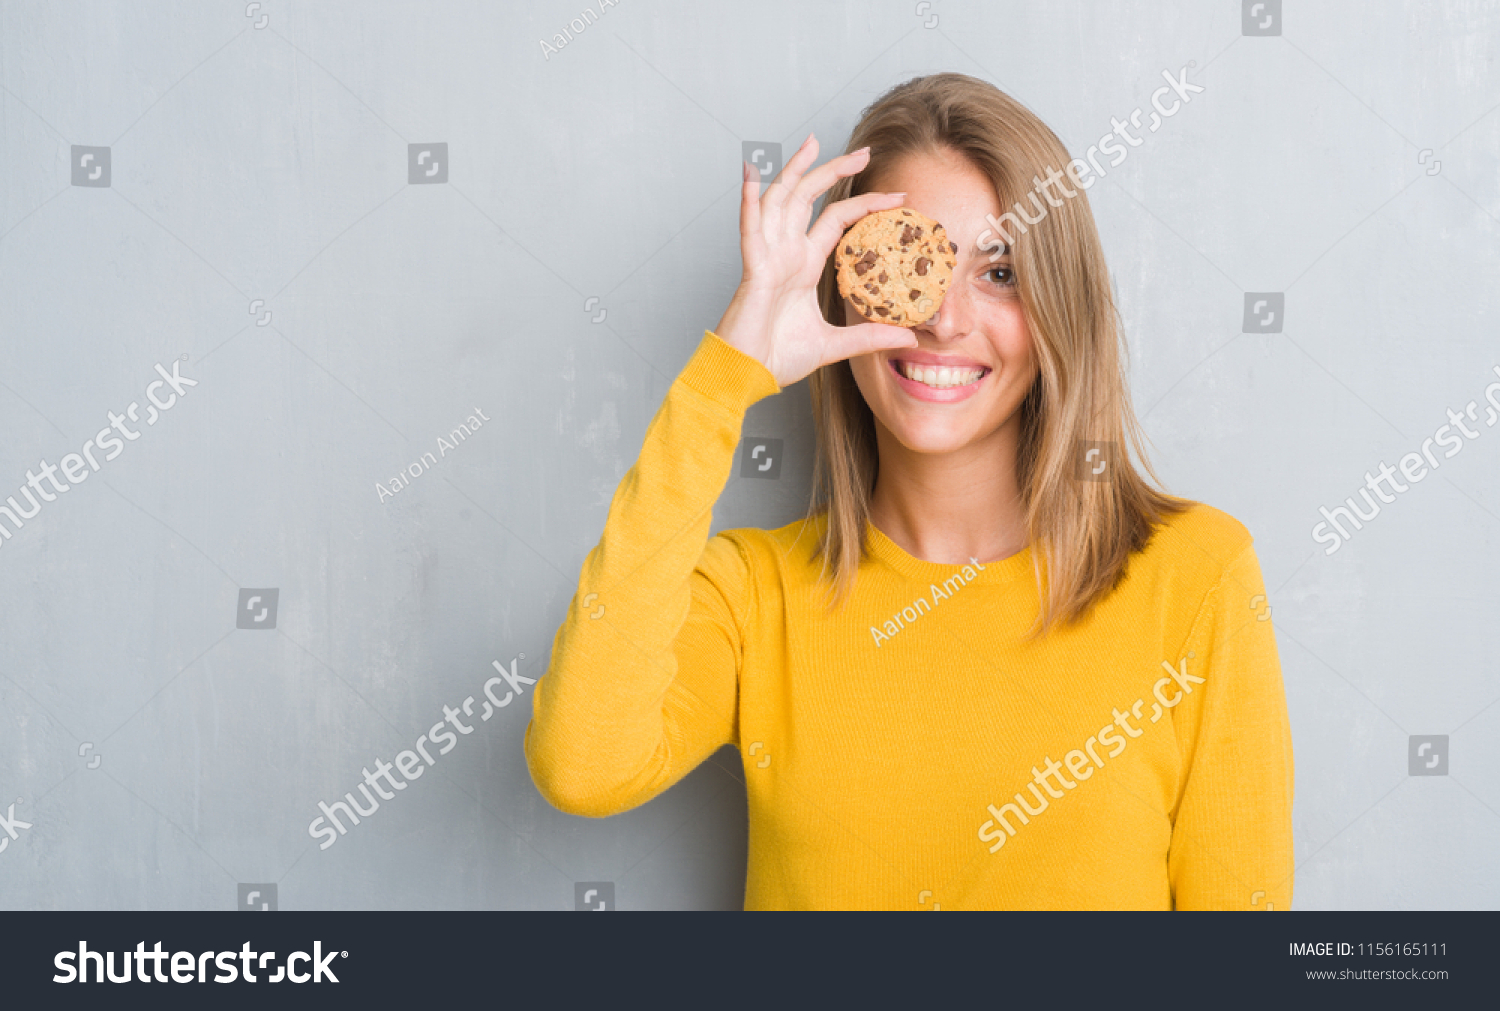 Beautiful young woman over grunge grey wall eating chocolate chip cooky with a happy face standing and smiling with a confident smile showing teeth #1156165111